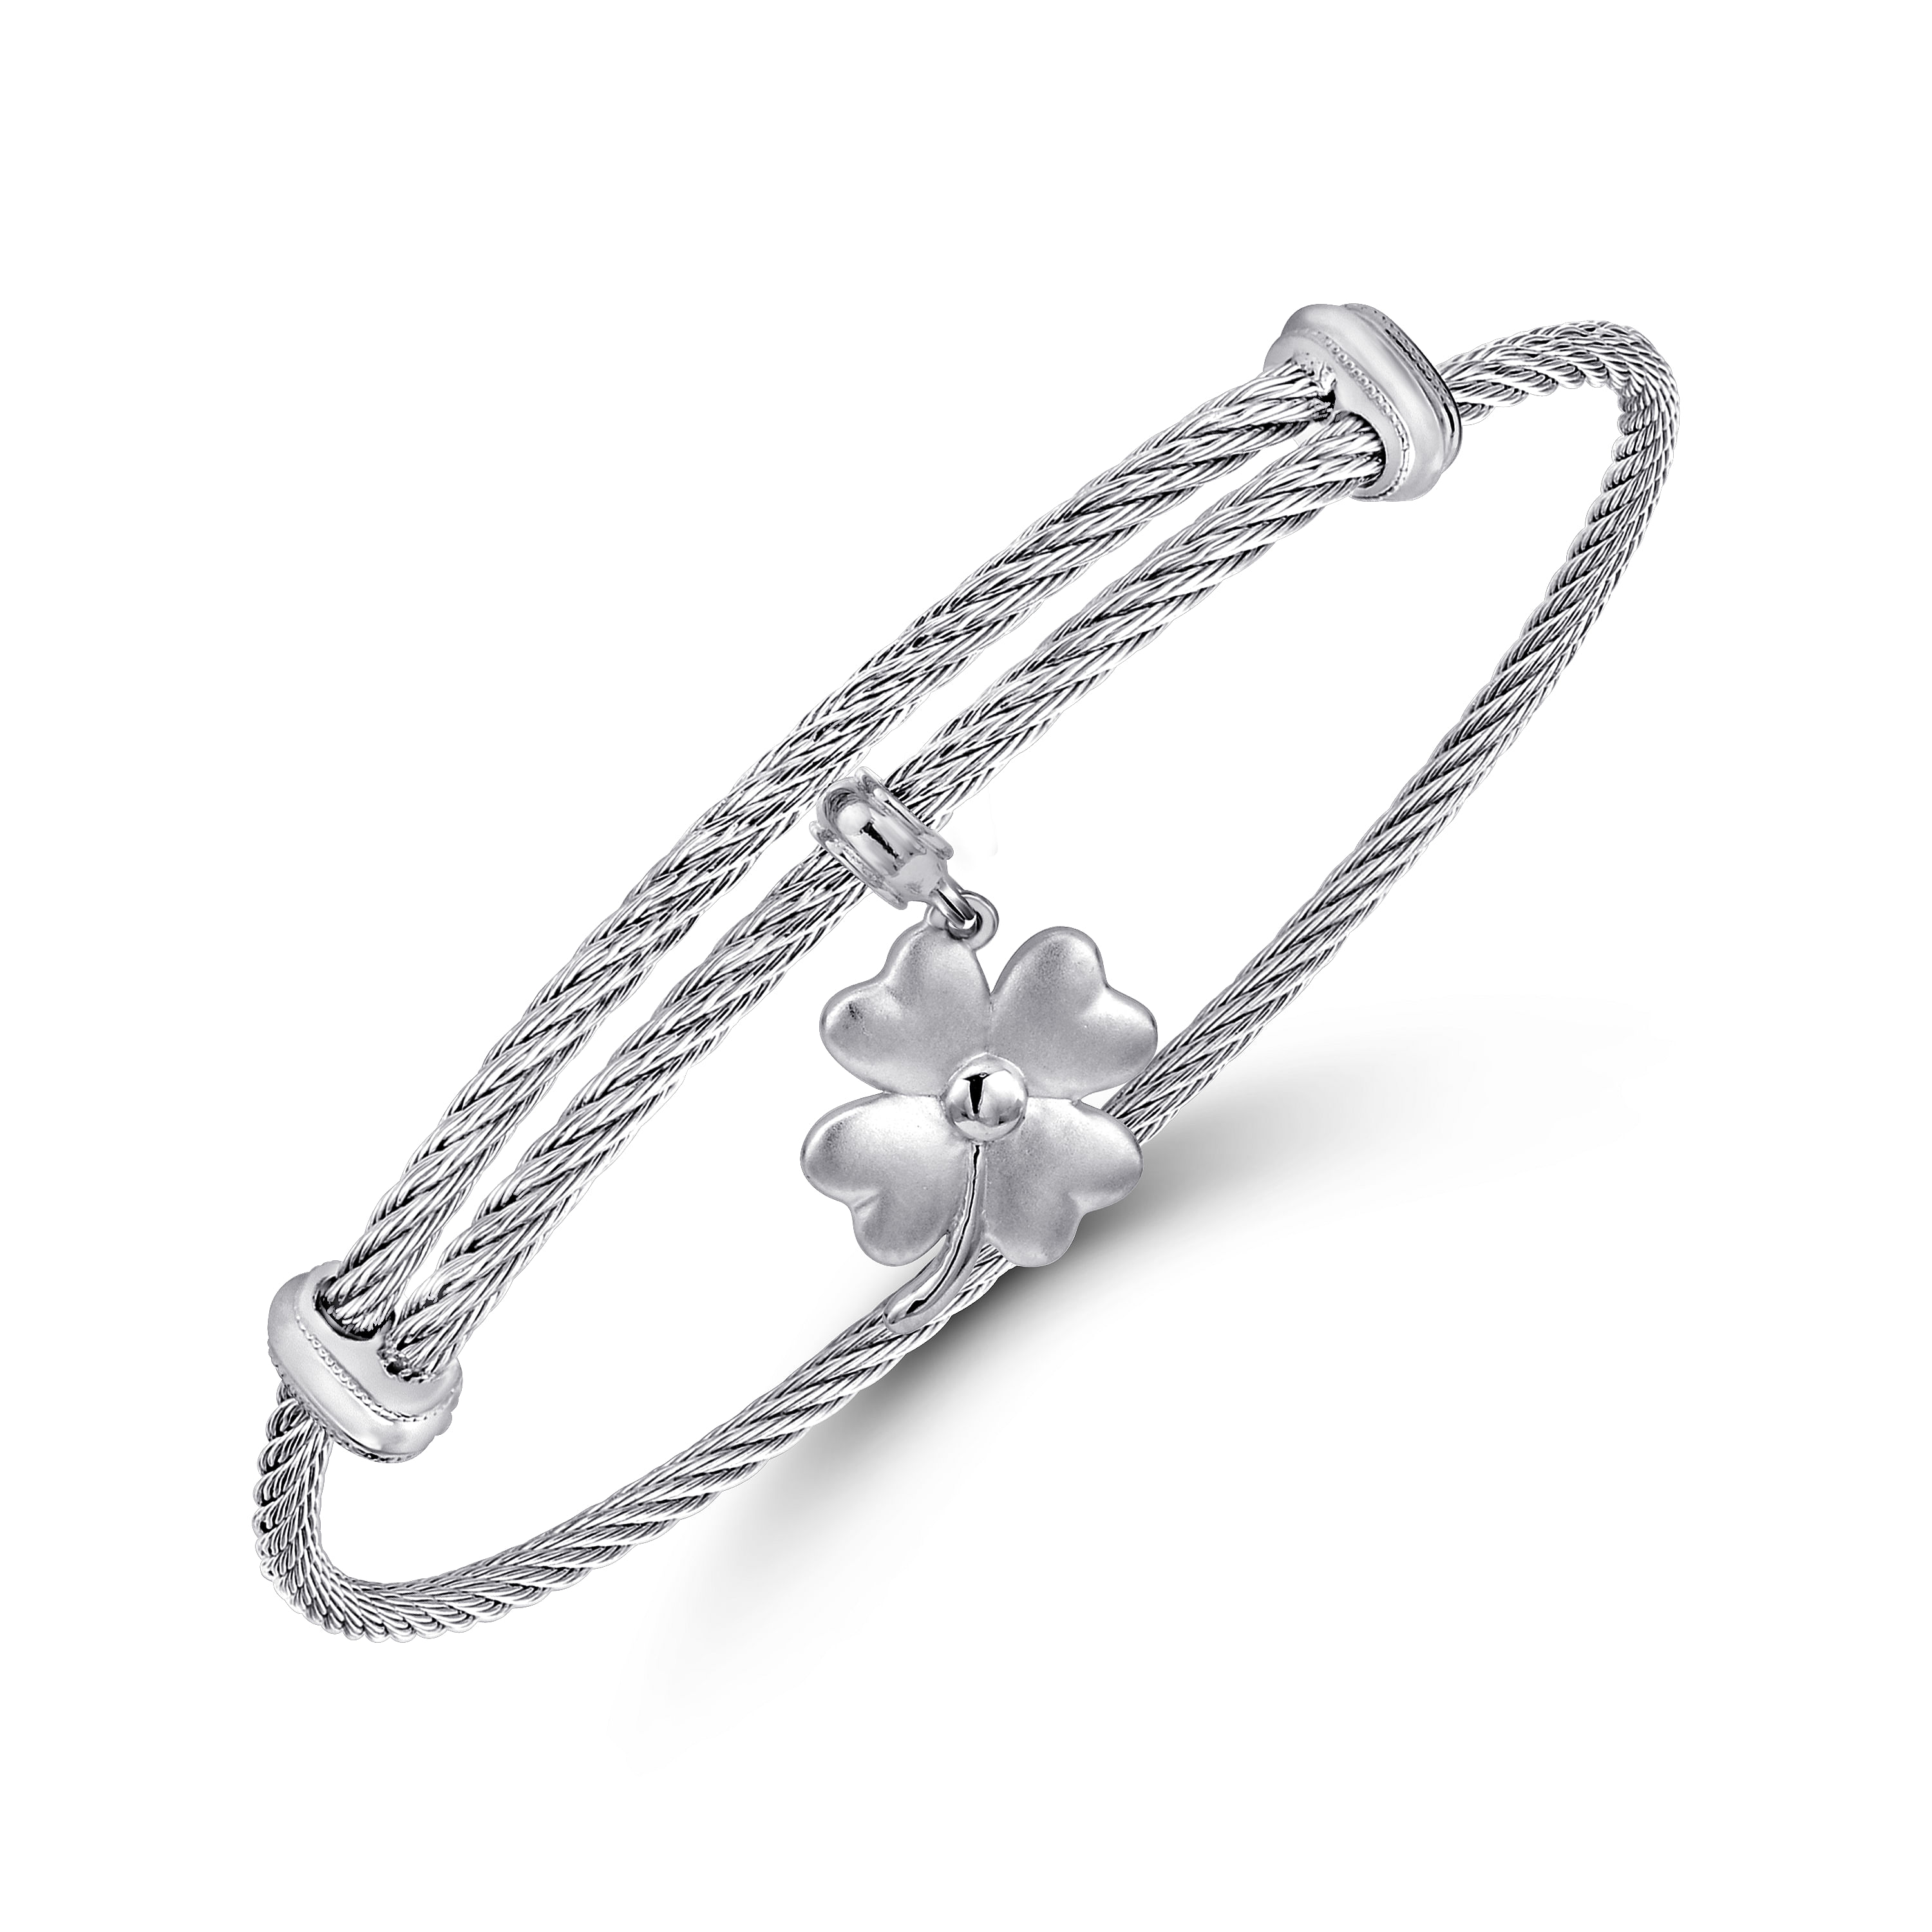 Adjustable Twisted Cable Stainless Steel Bangle with Sterling Silver 4 Leaf Clover Charm